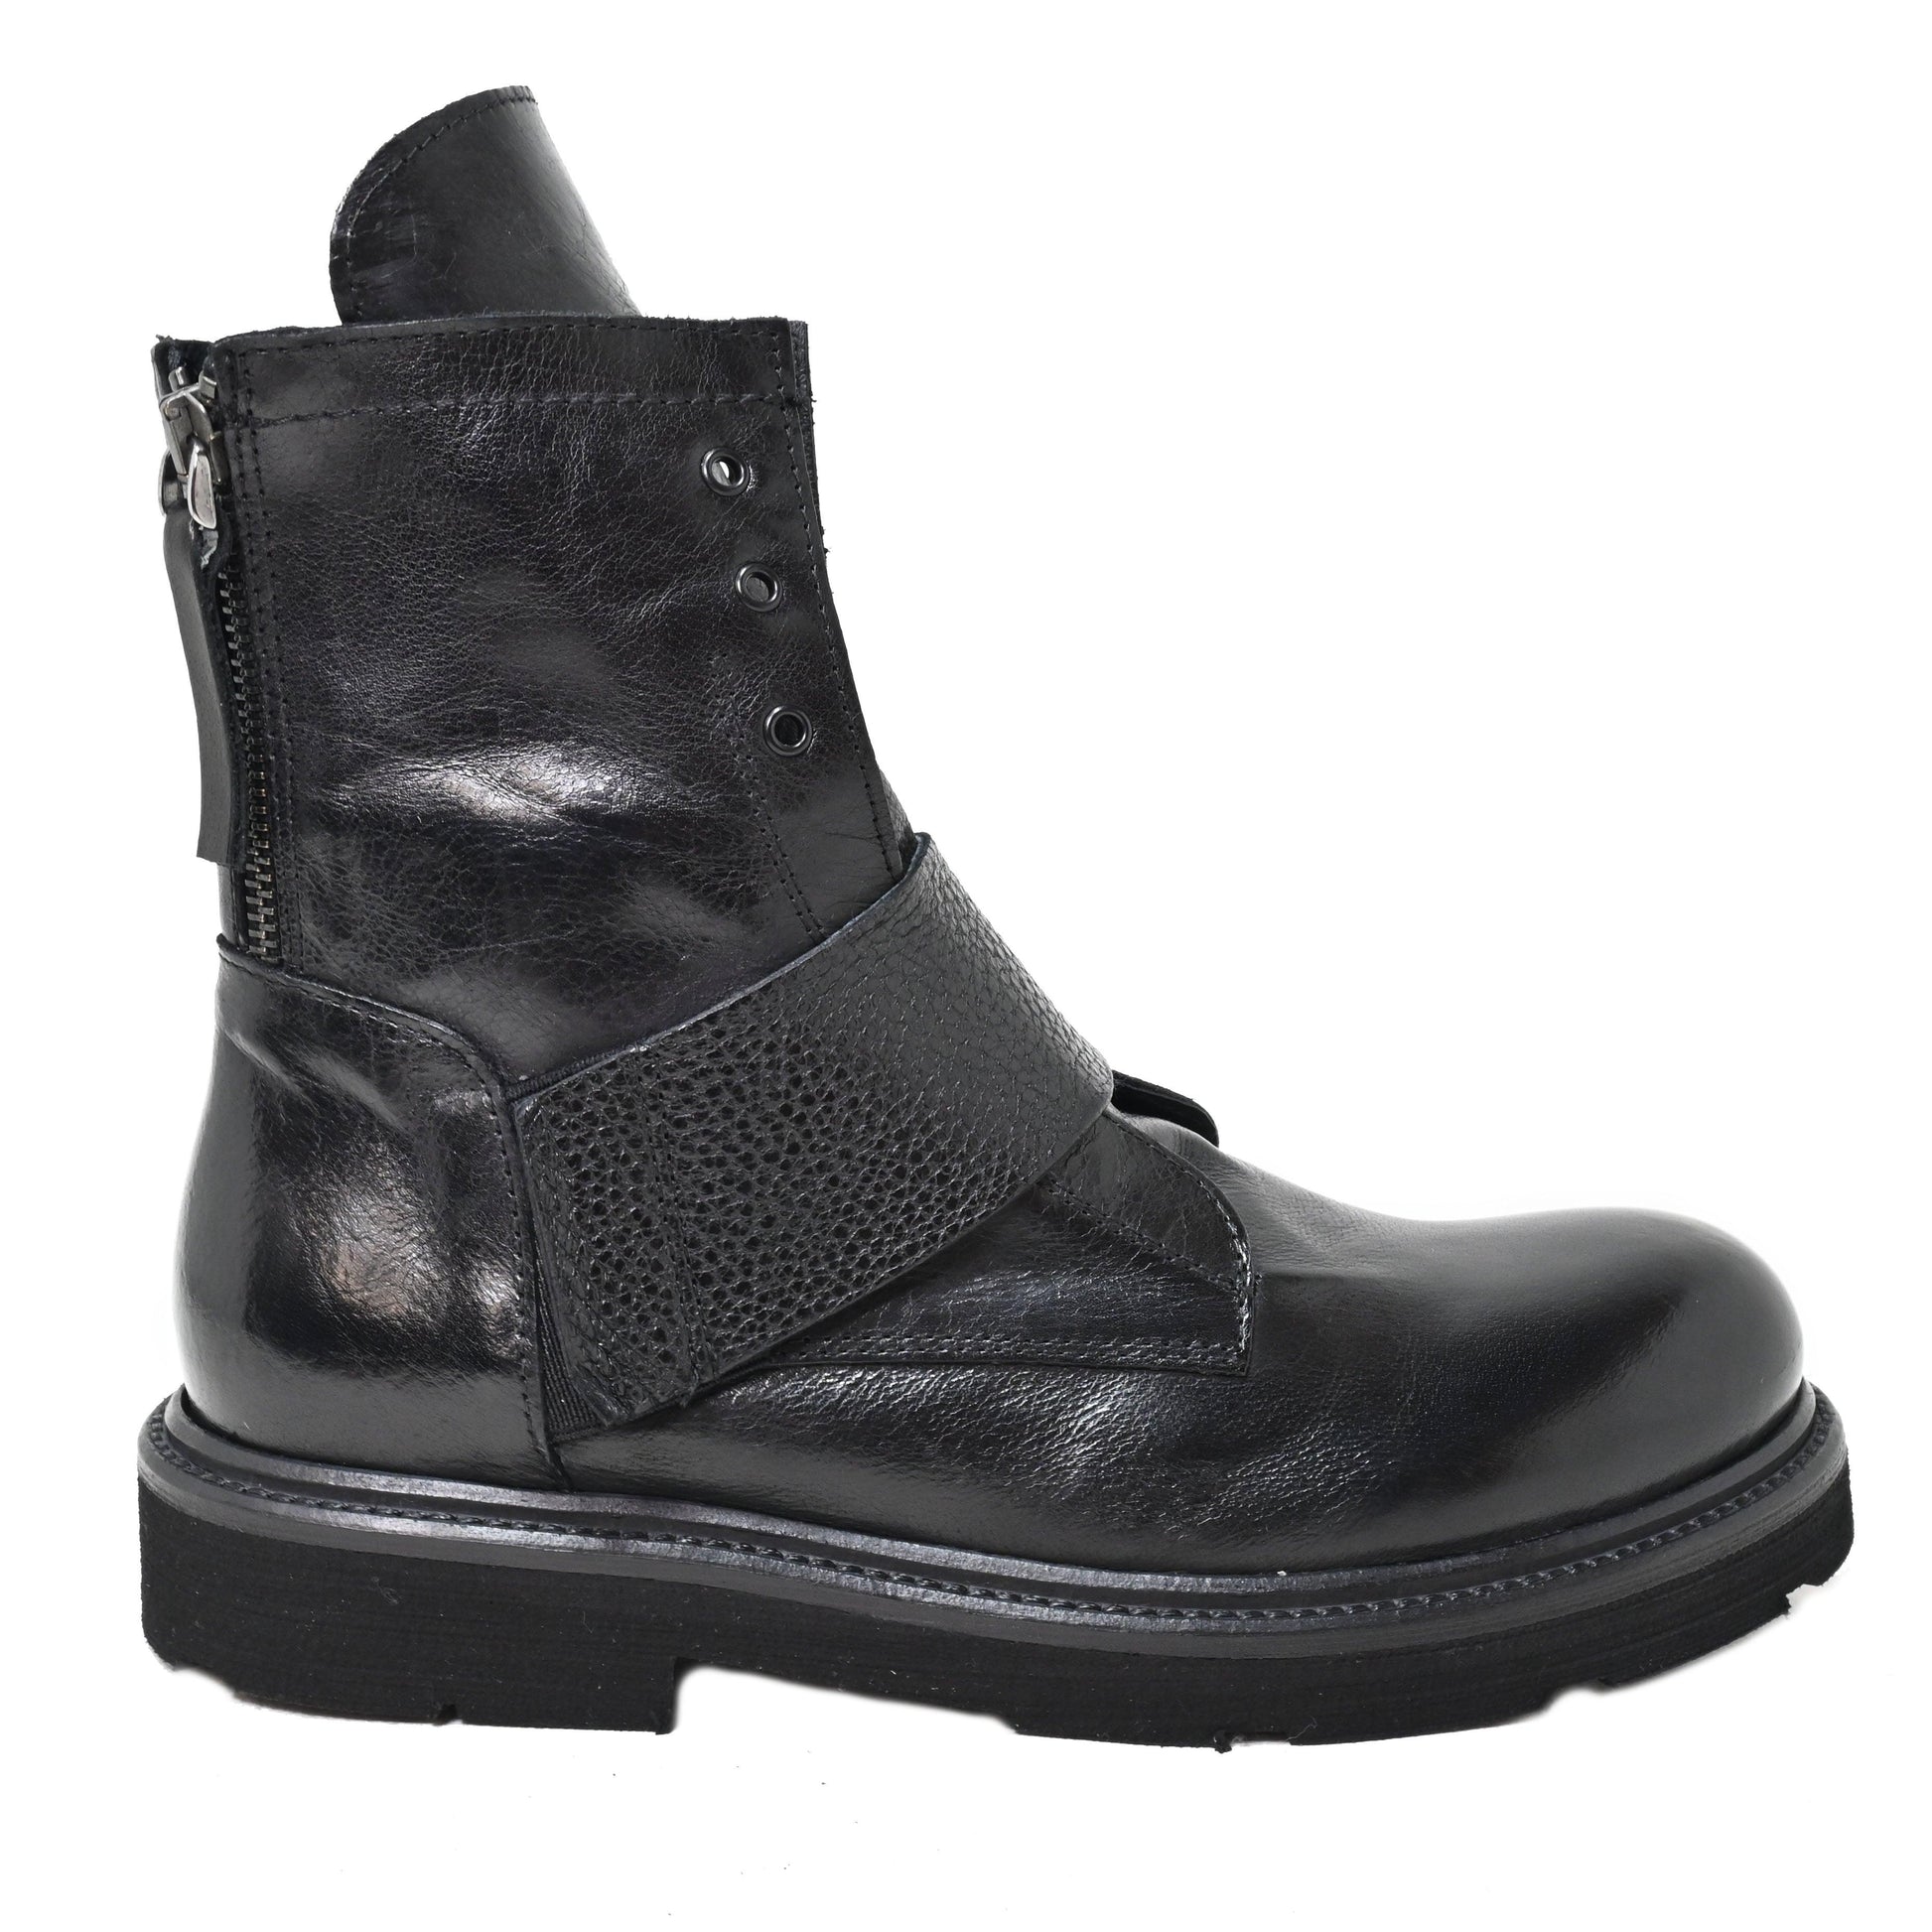 ALBA 33 - ankle boot leather BLACK - History541